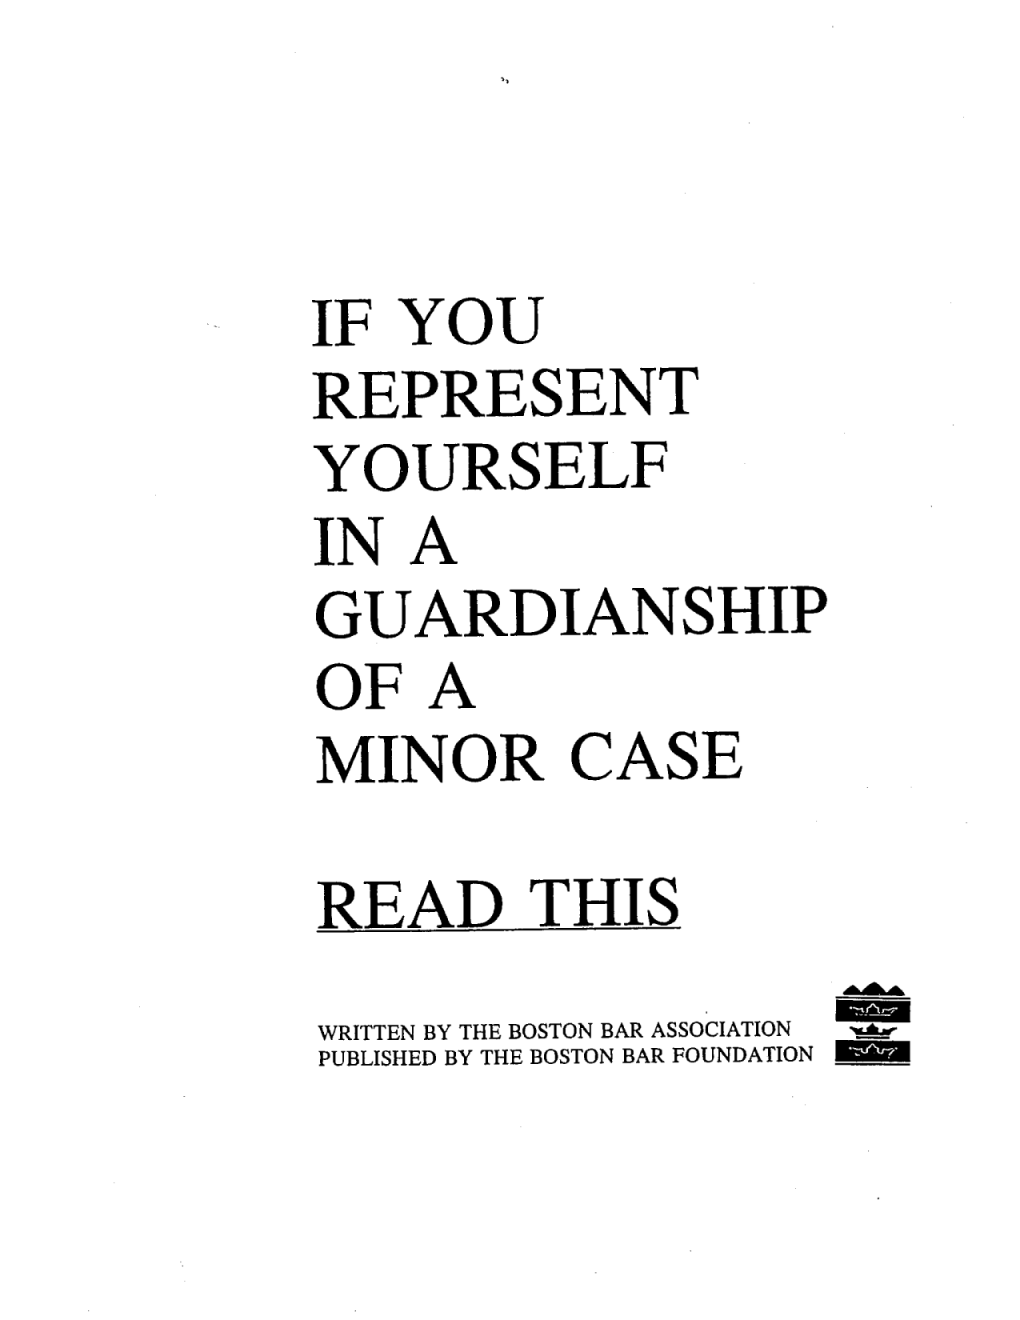 Guardianship of a Minor Booklet